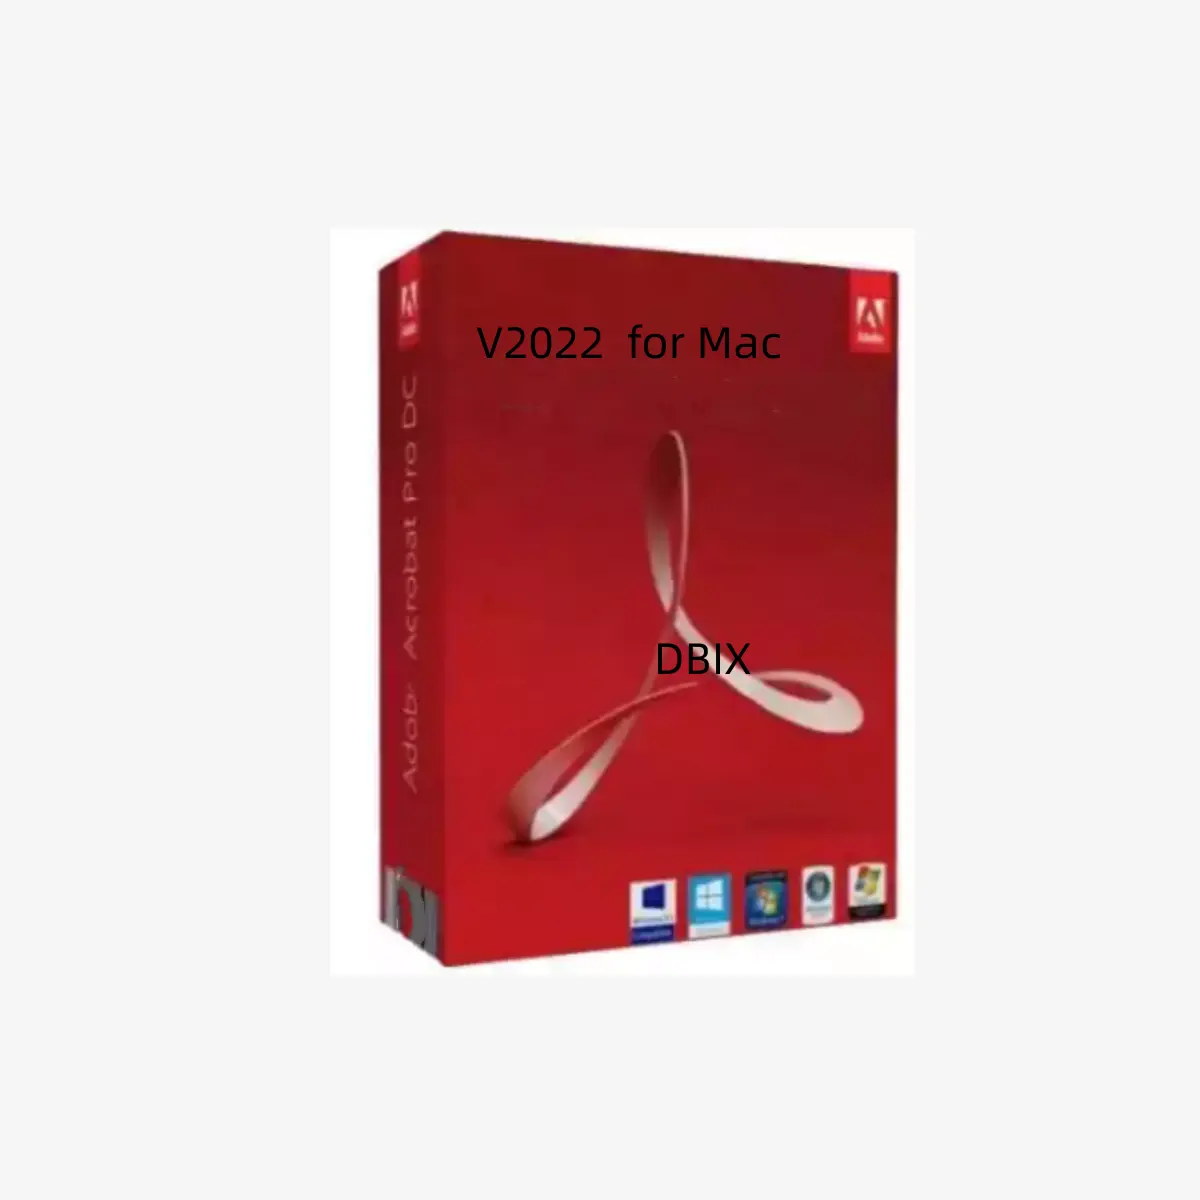 PC/Mac Send Download Link by one-driver Professional Pro Acroba Pro DC 2022 Ad Acrobt Professional DC For PDF Editor Edit